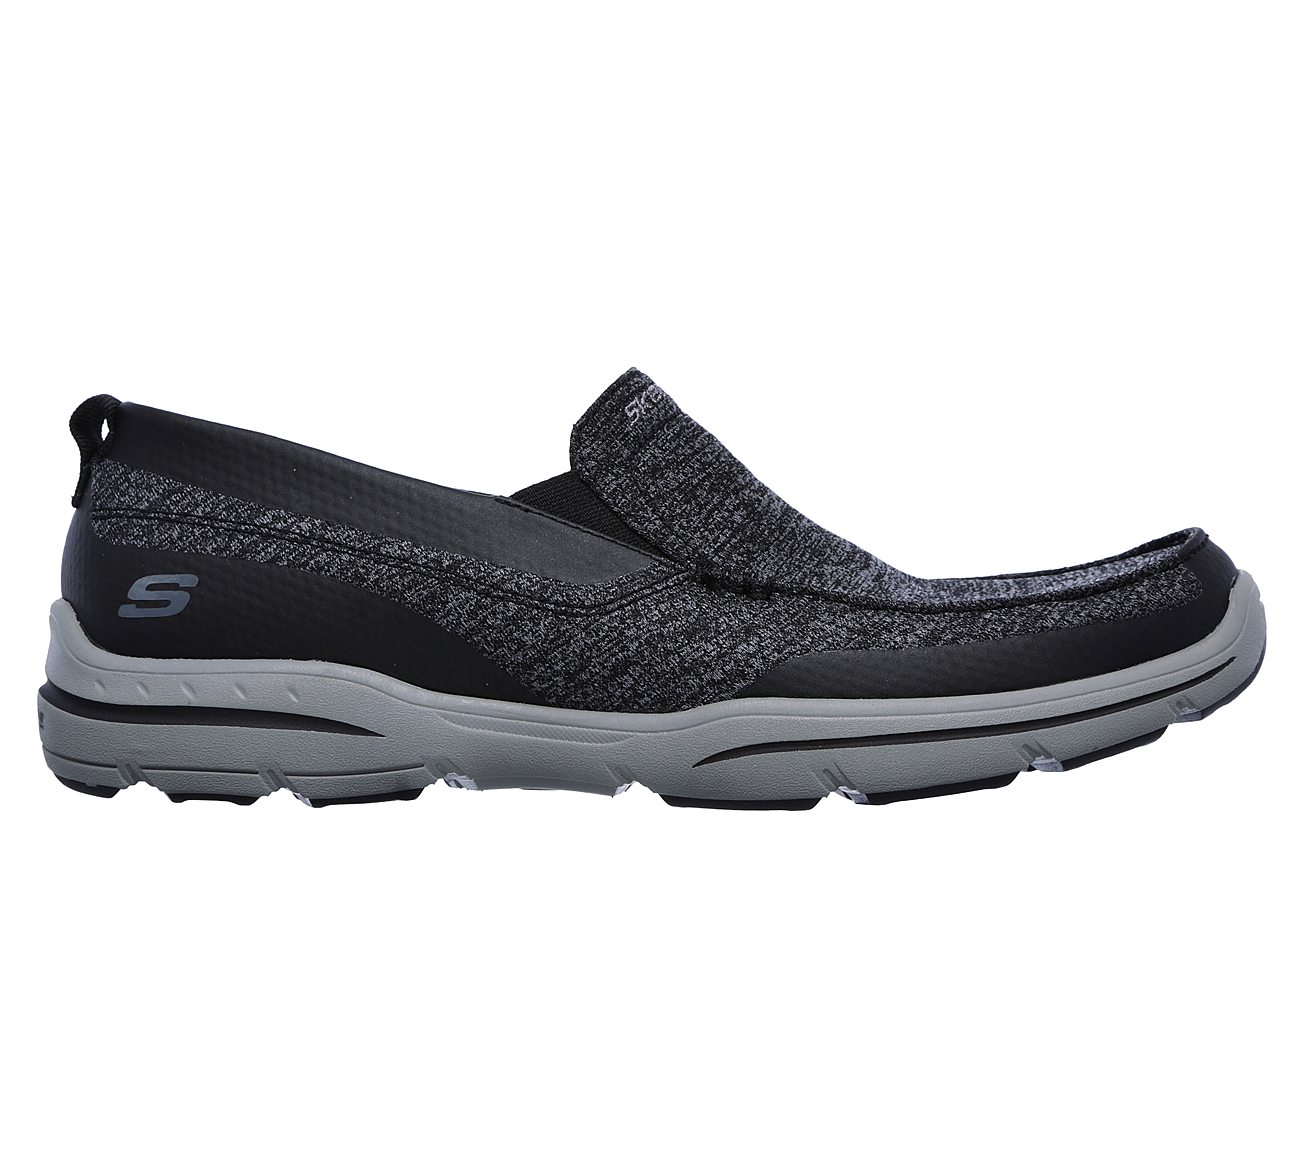 Buy SKECHERS Relaxed Fit: Harper - Moven Relaxed Fit Shoes